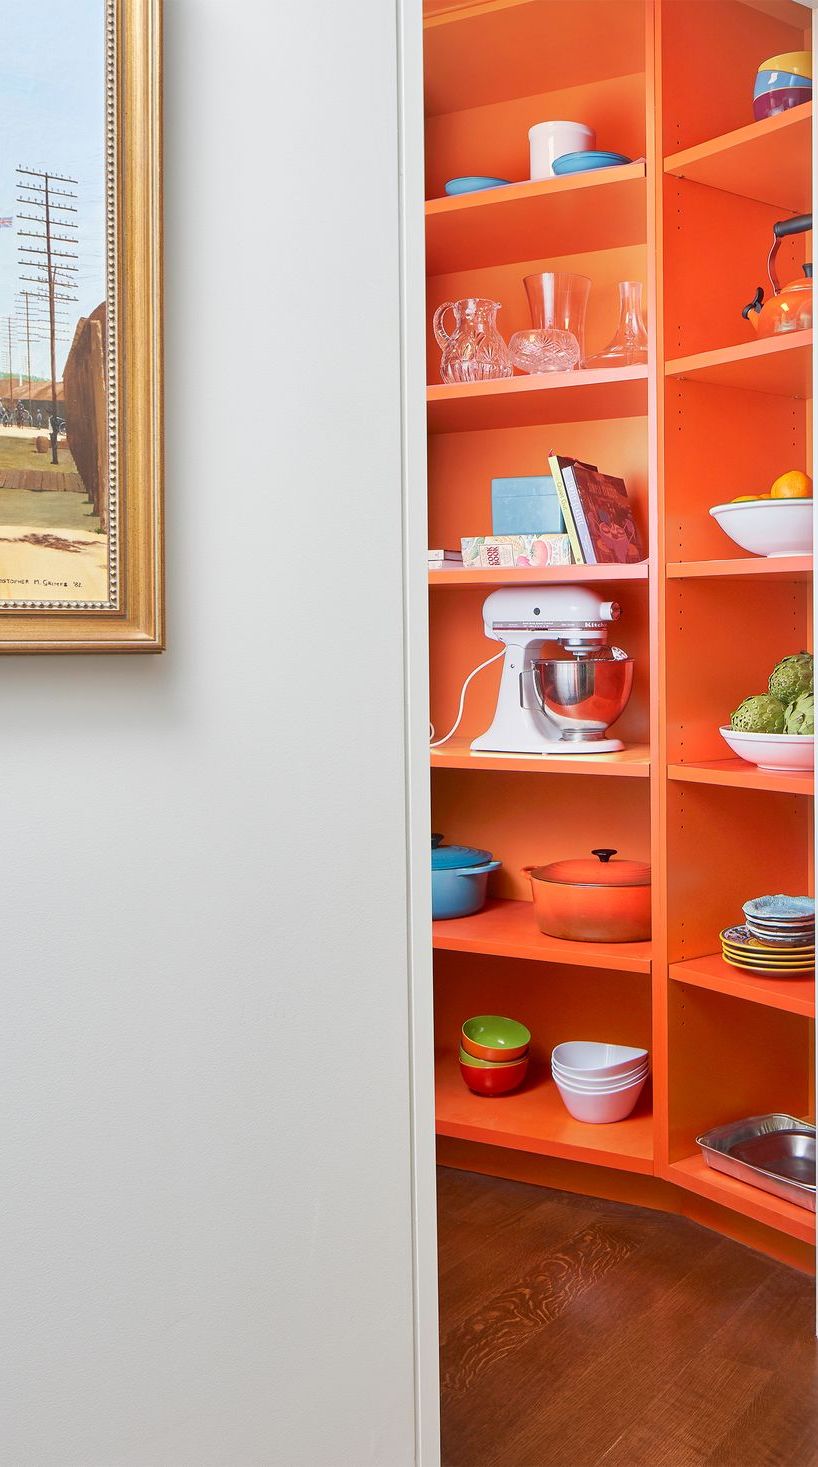 orange paint colors in a kitchen pantry